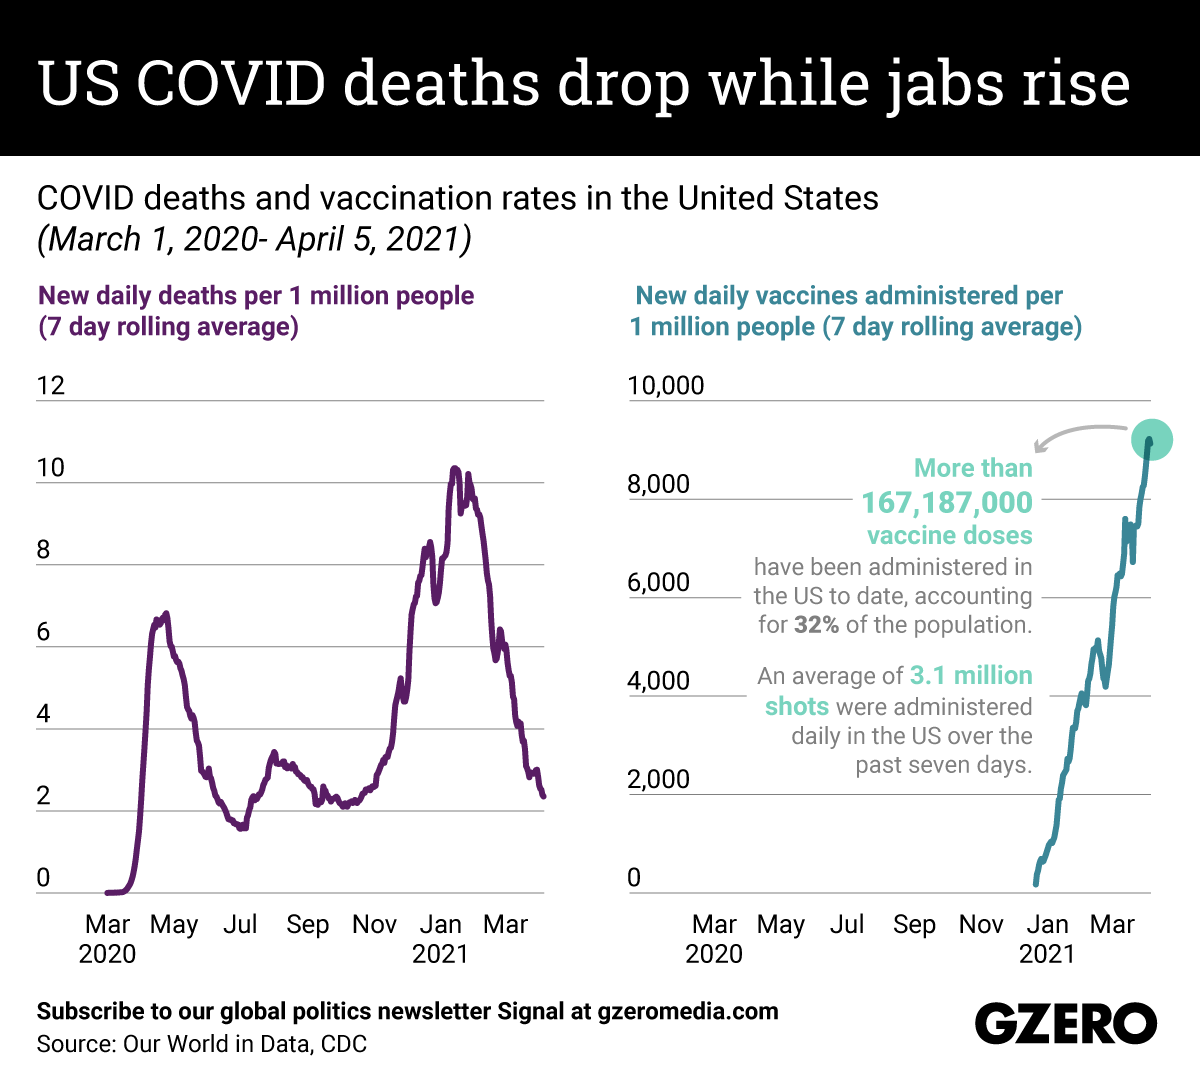 The Graphic Truth: US COVID deaths drop while jabs rise